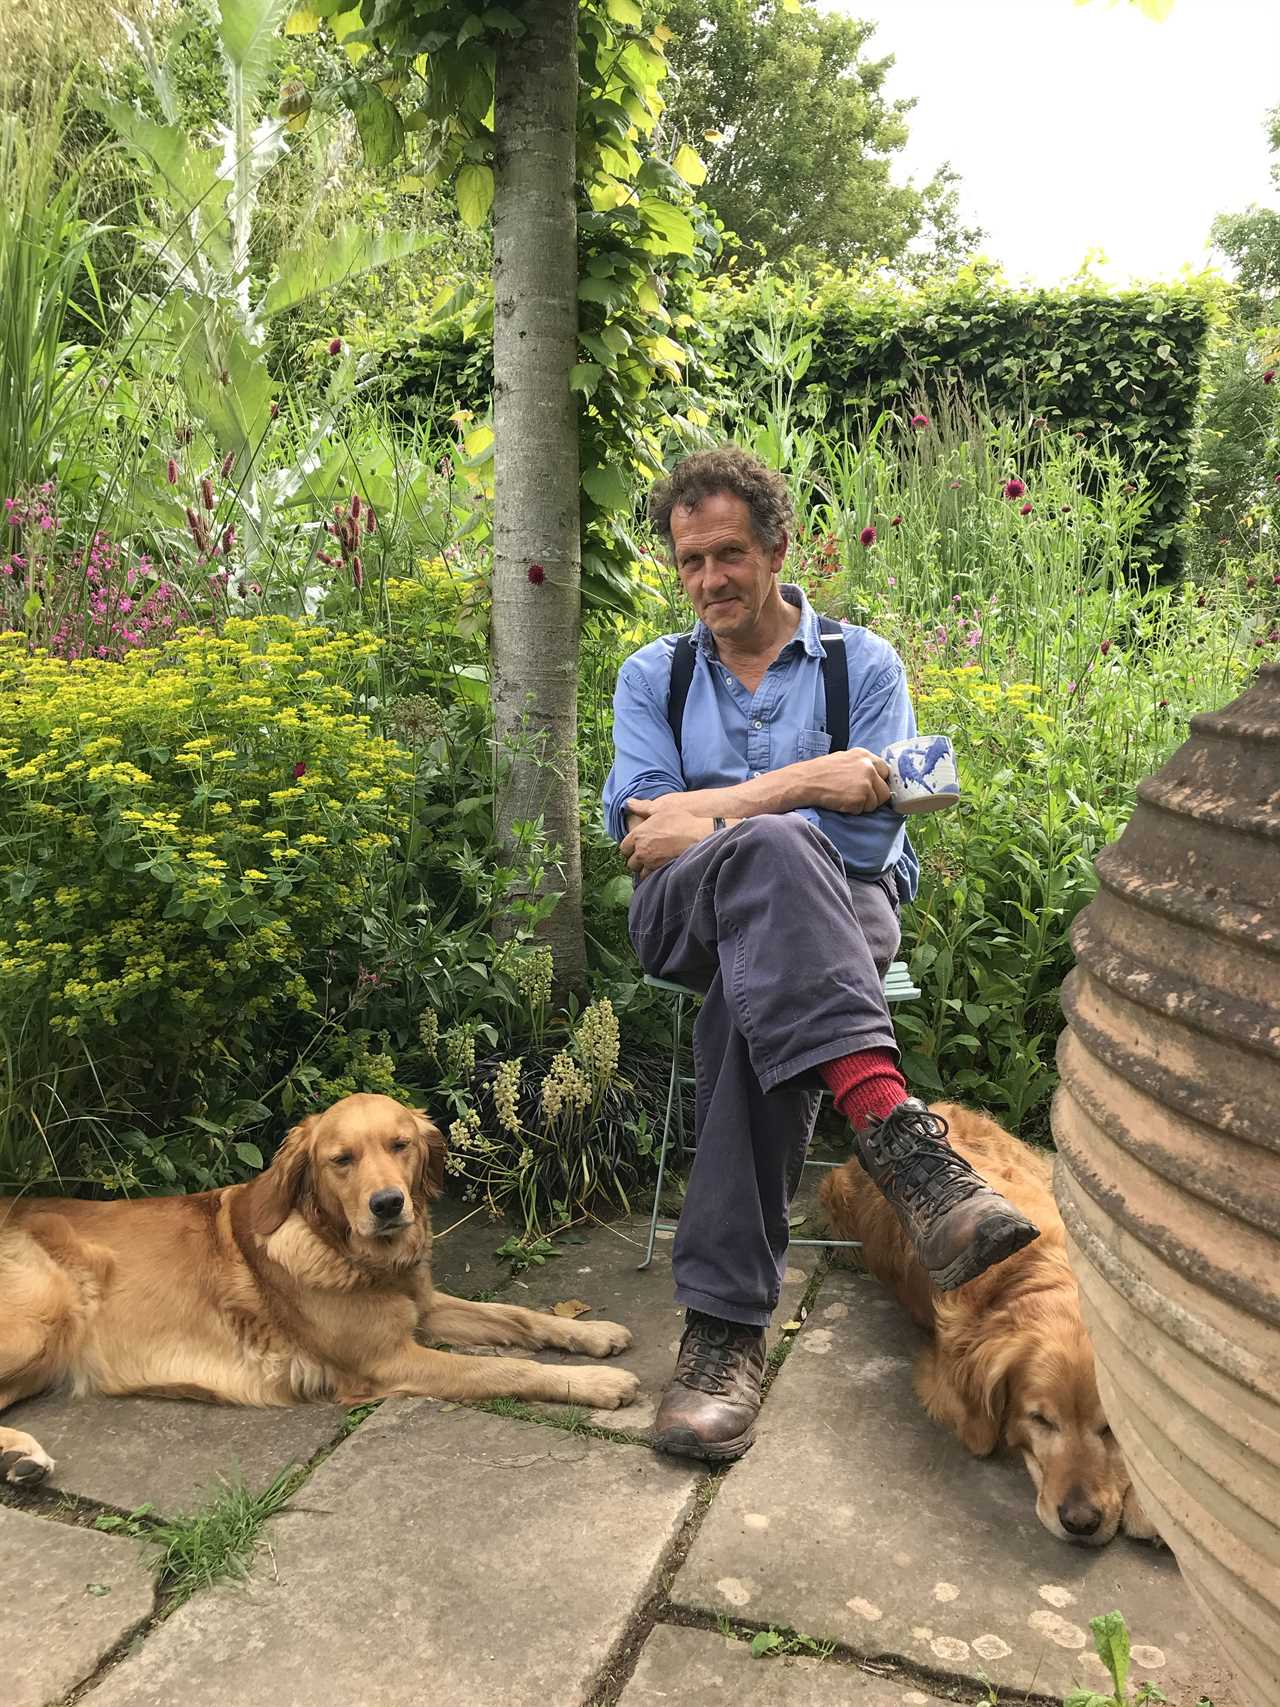 Monty Don to Leave Gardeners' World in the Next Five Years